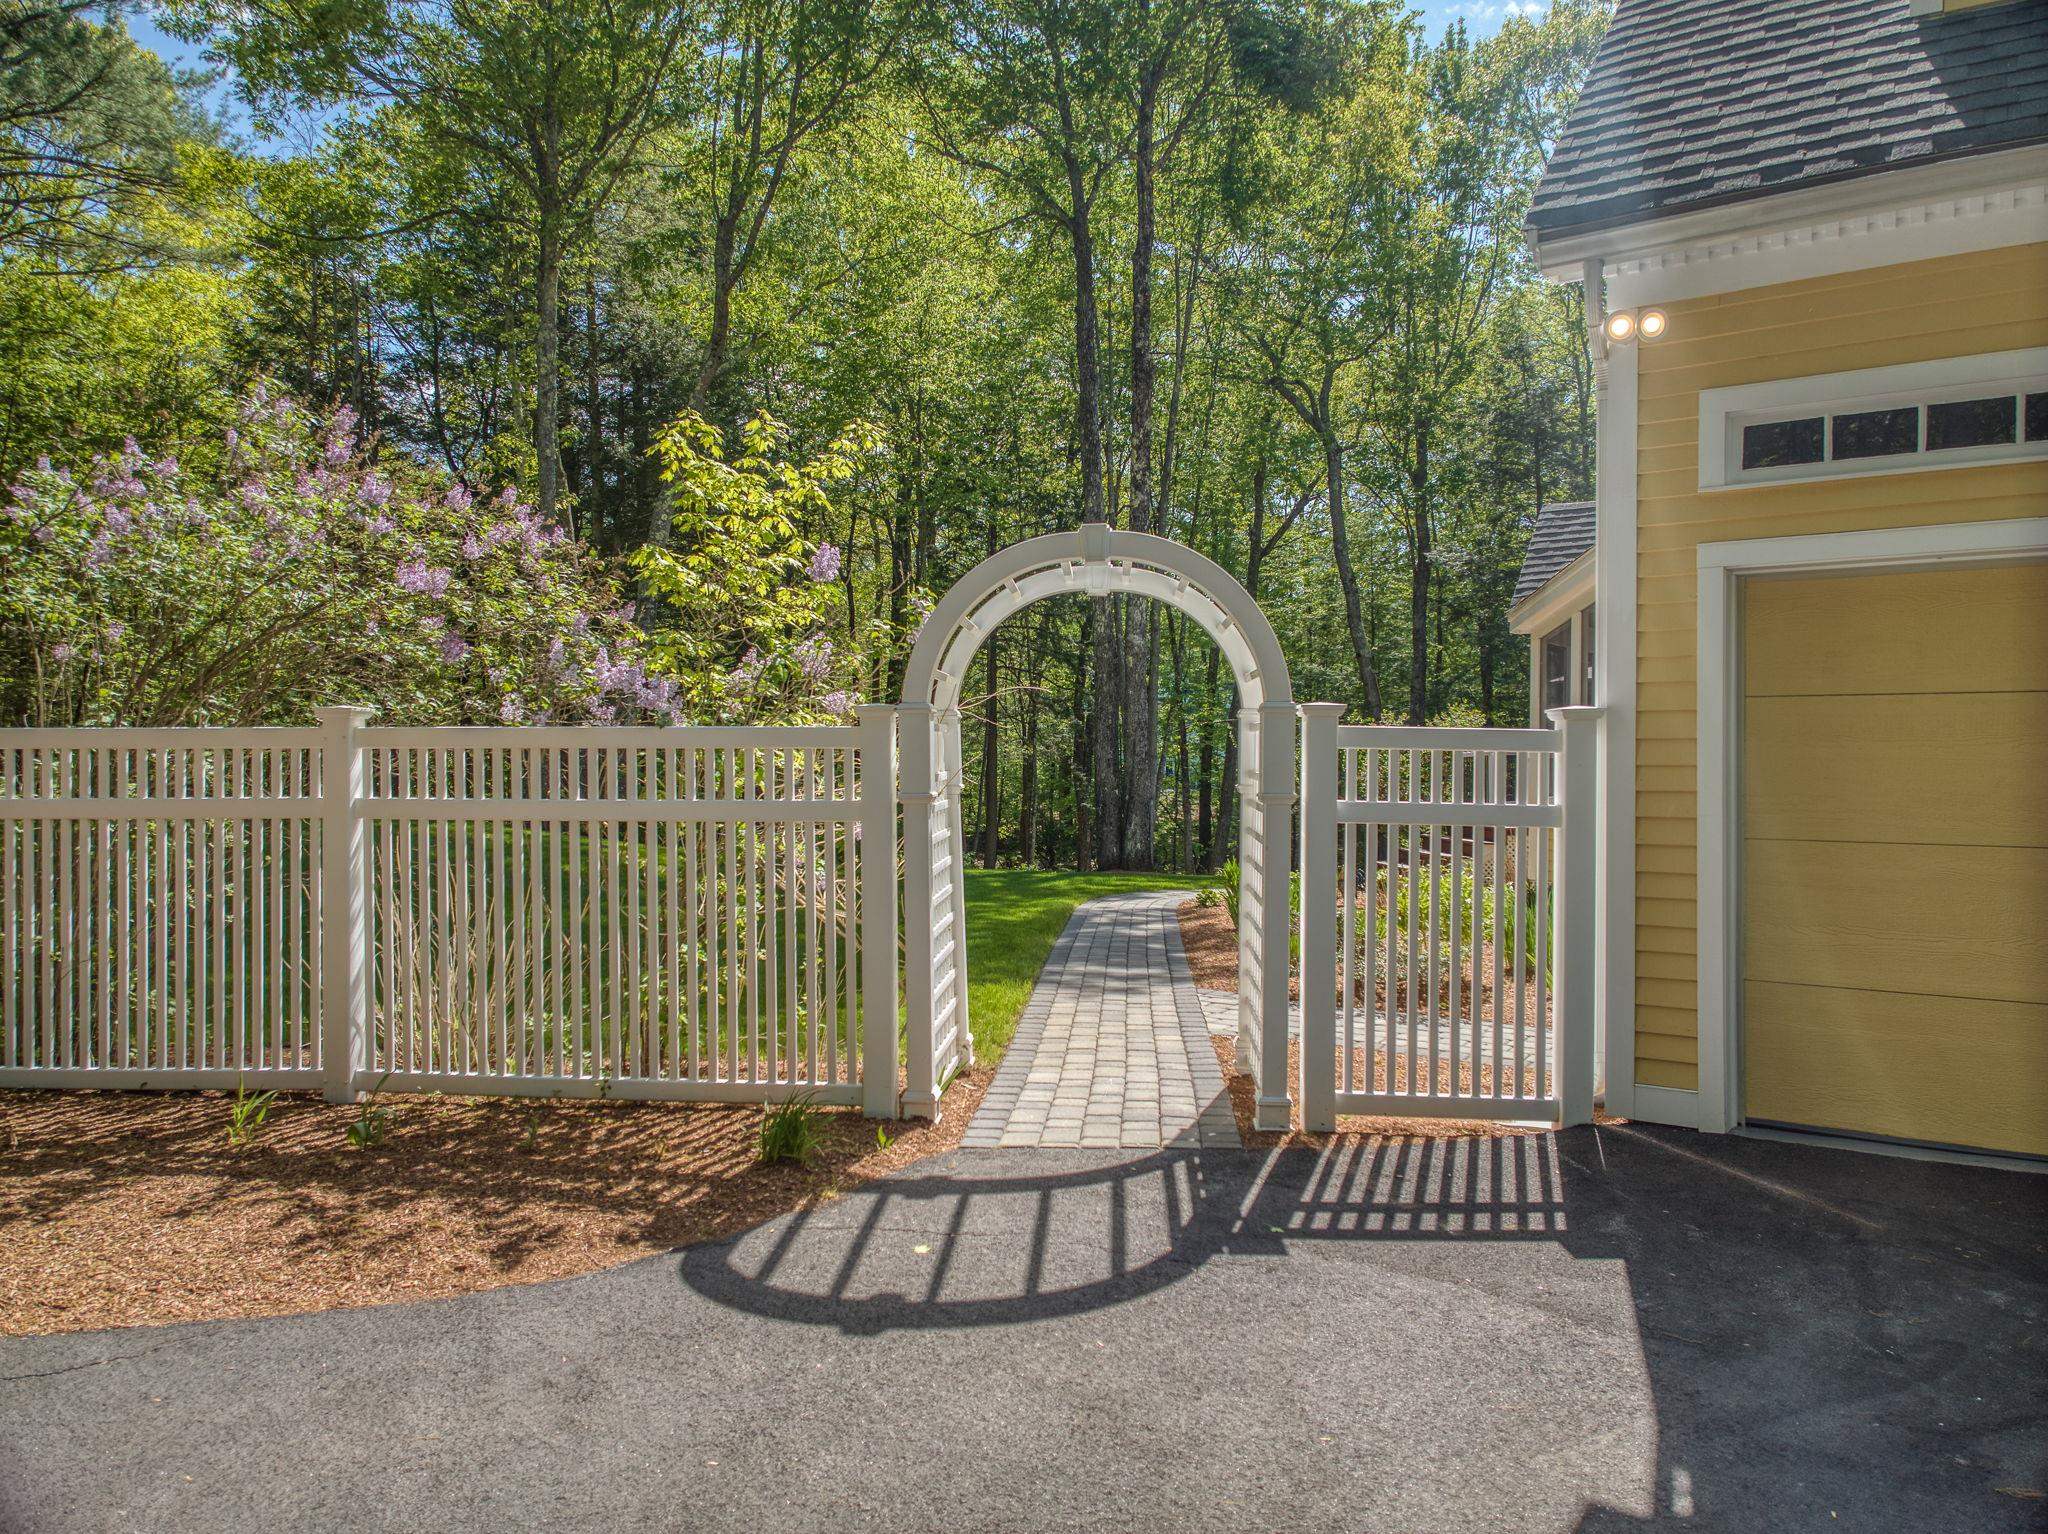 Arched Arbor Draws You to the Backyard